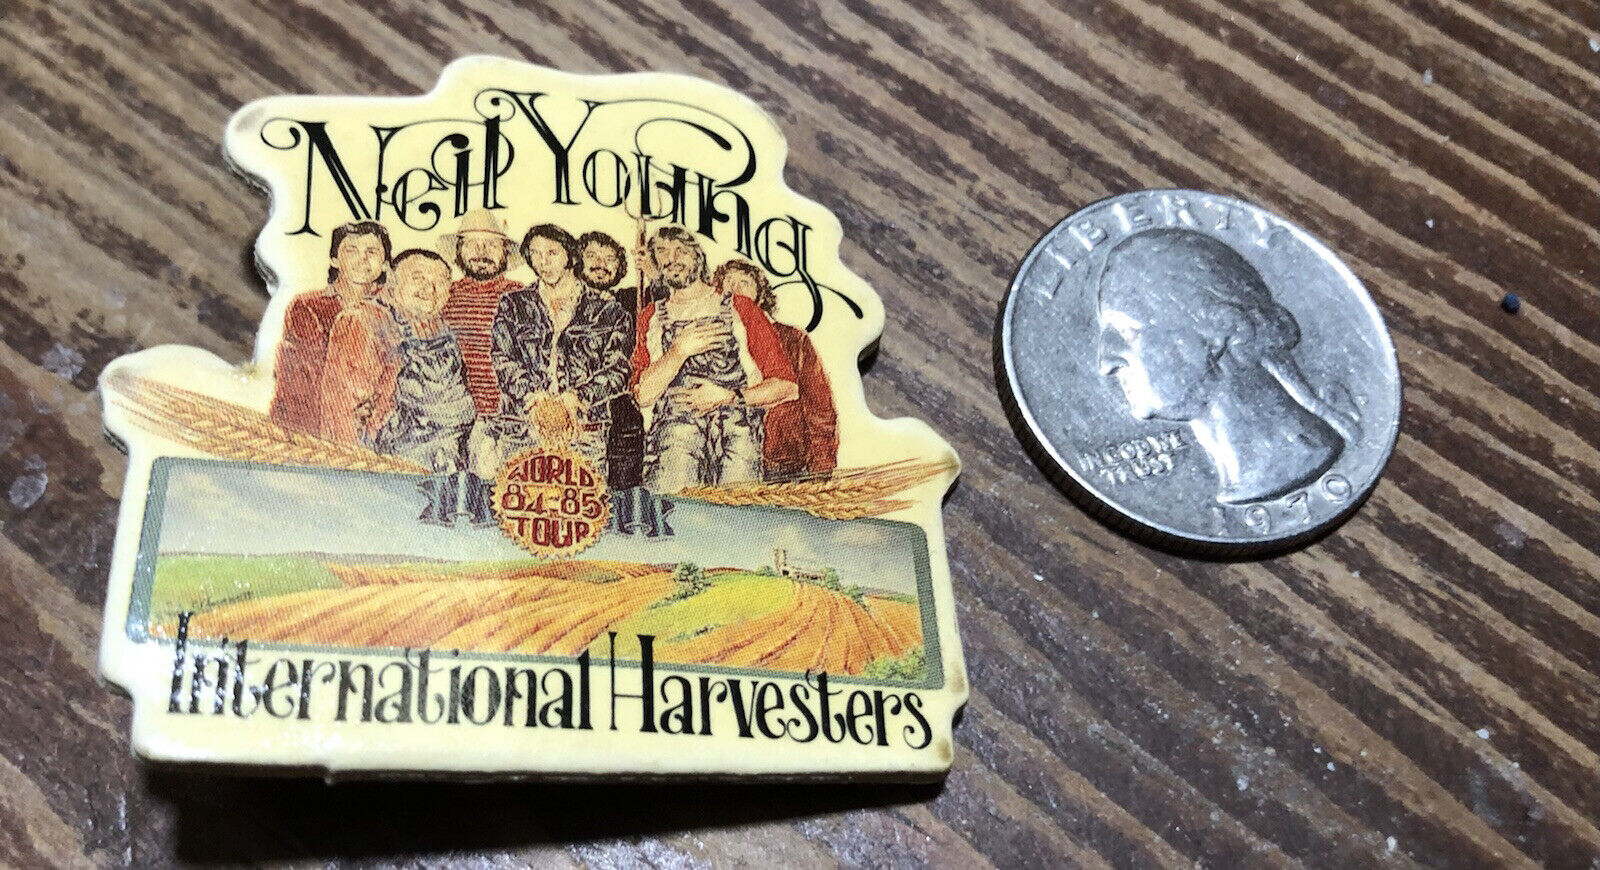 Neil Young International Harvester￼s concert pin